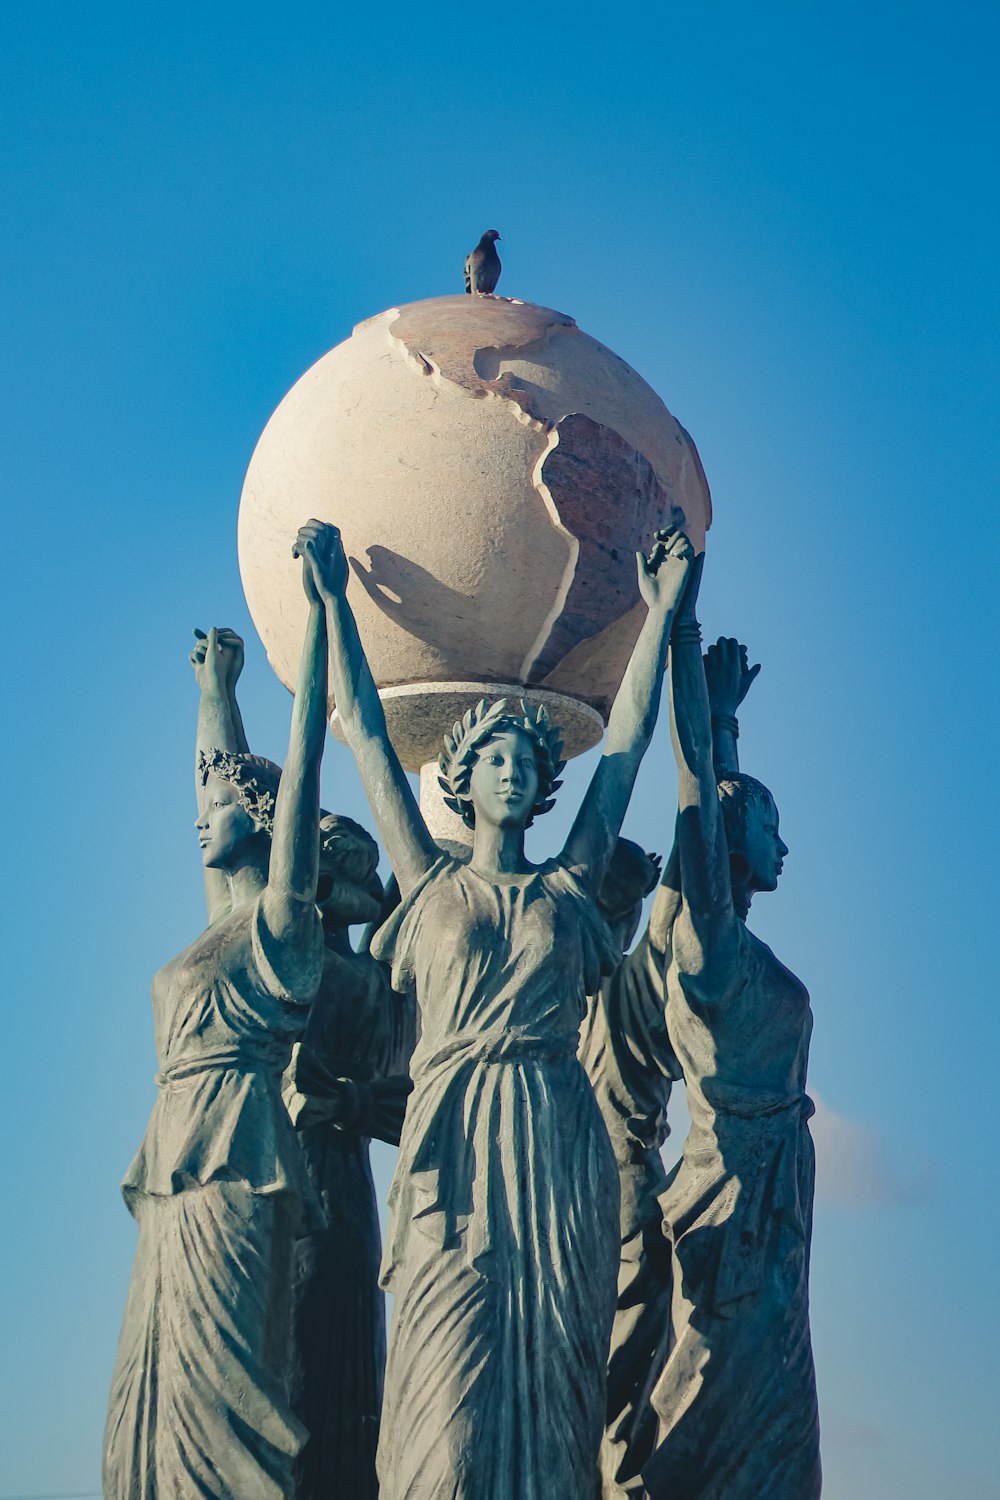 a statue of three women carrying a globe on their heads